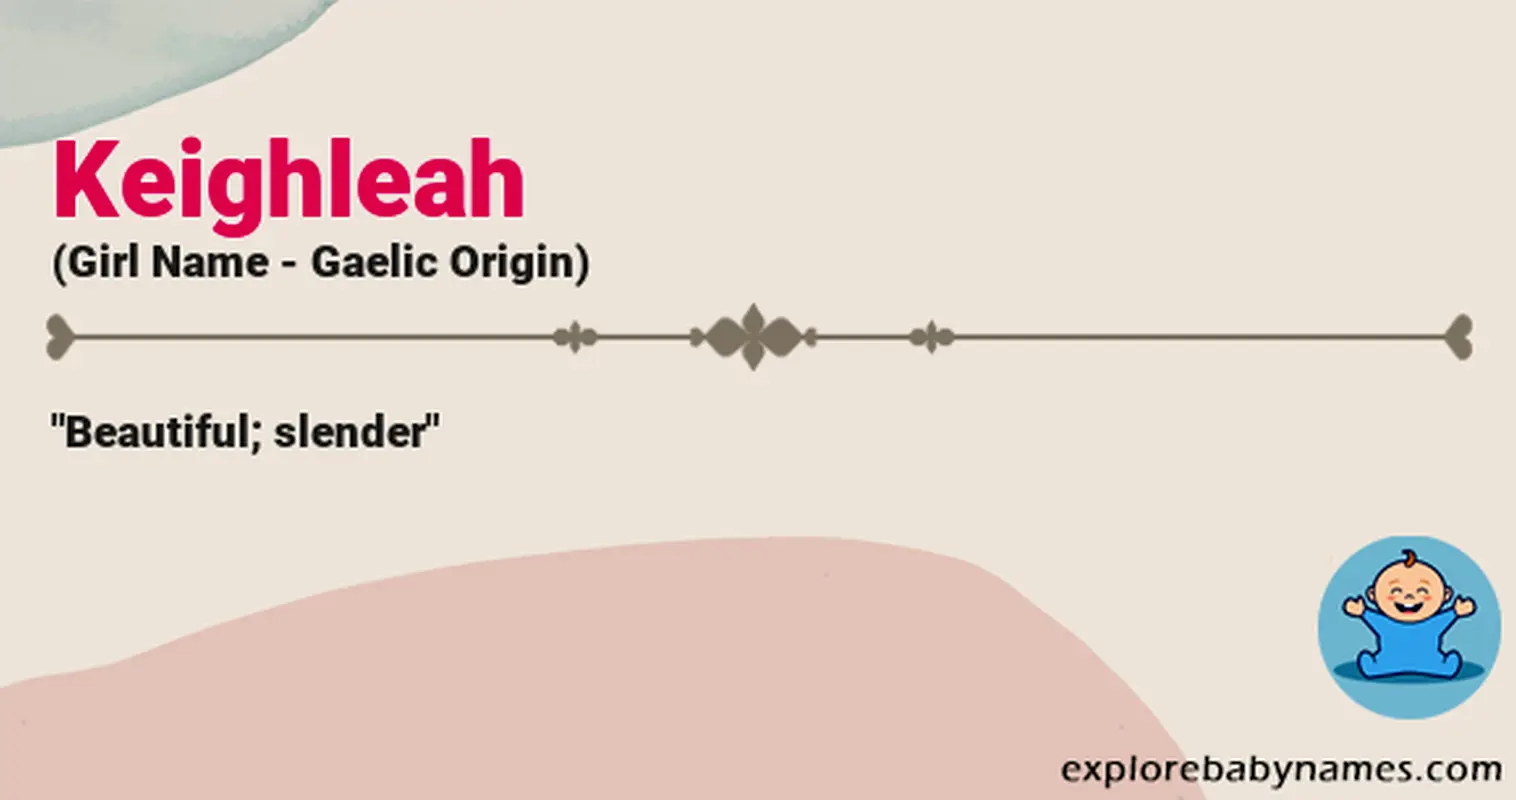 Meaning of Keighleah